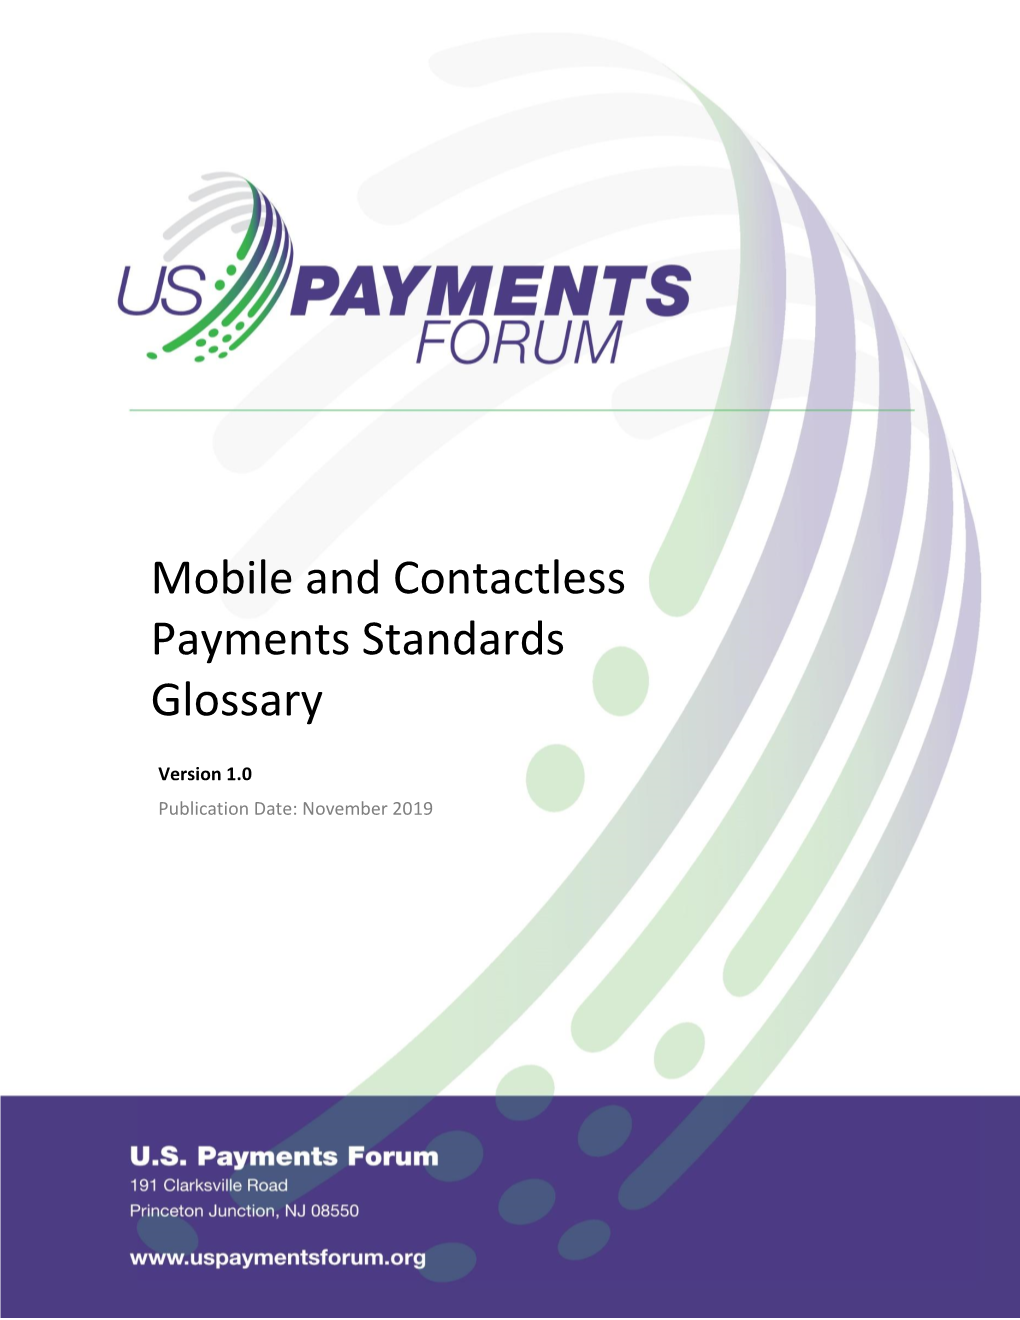 Mobile and Contactless Payments Standards Glossary